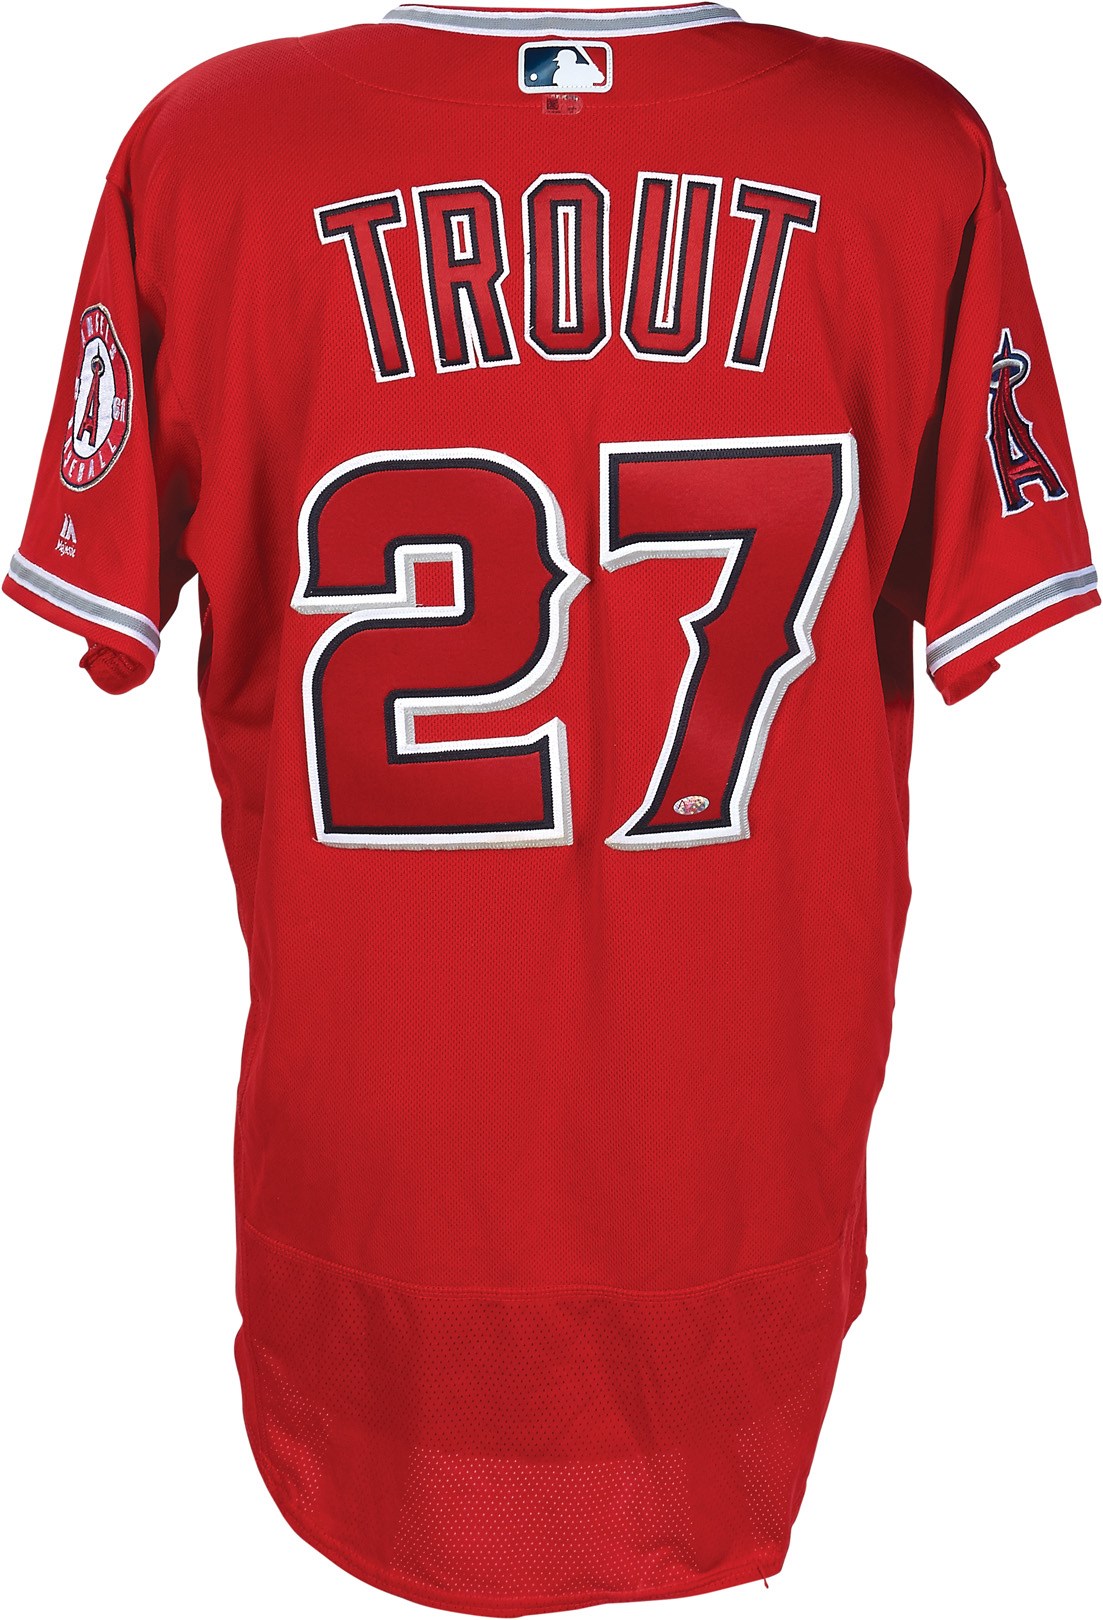 mike trout game used jersey